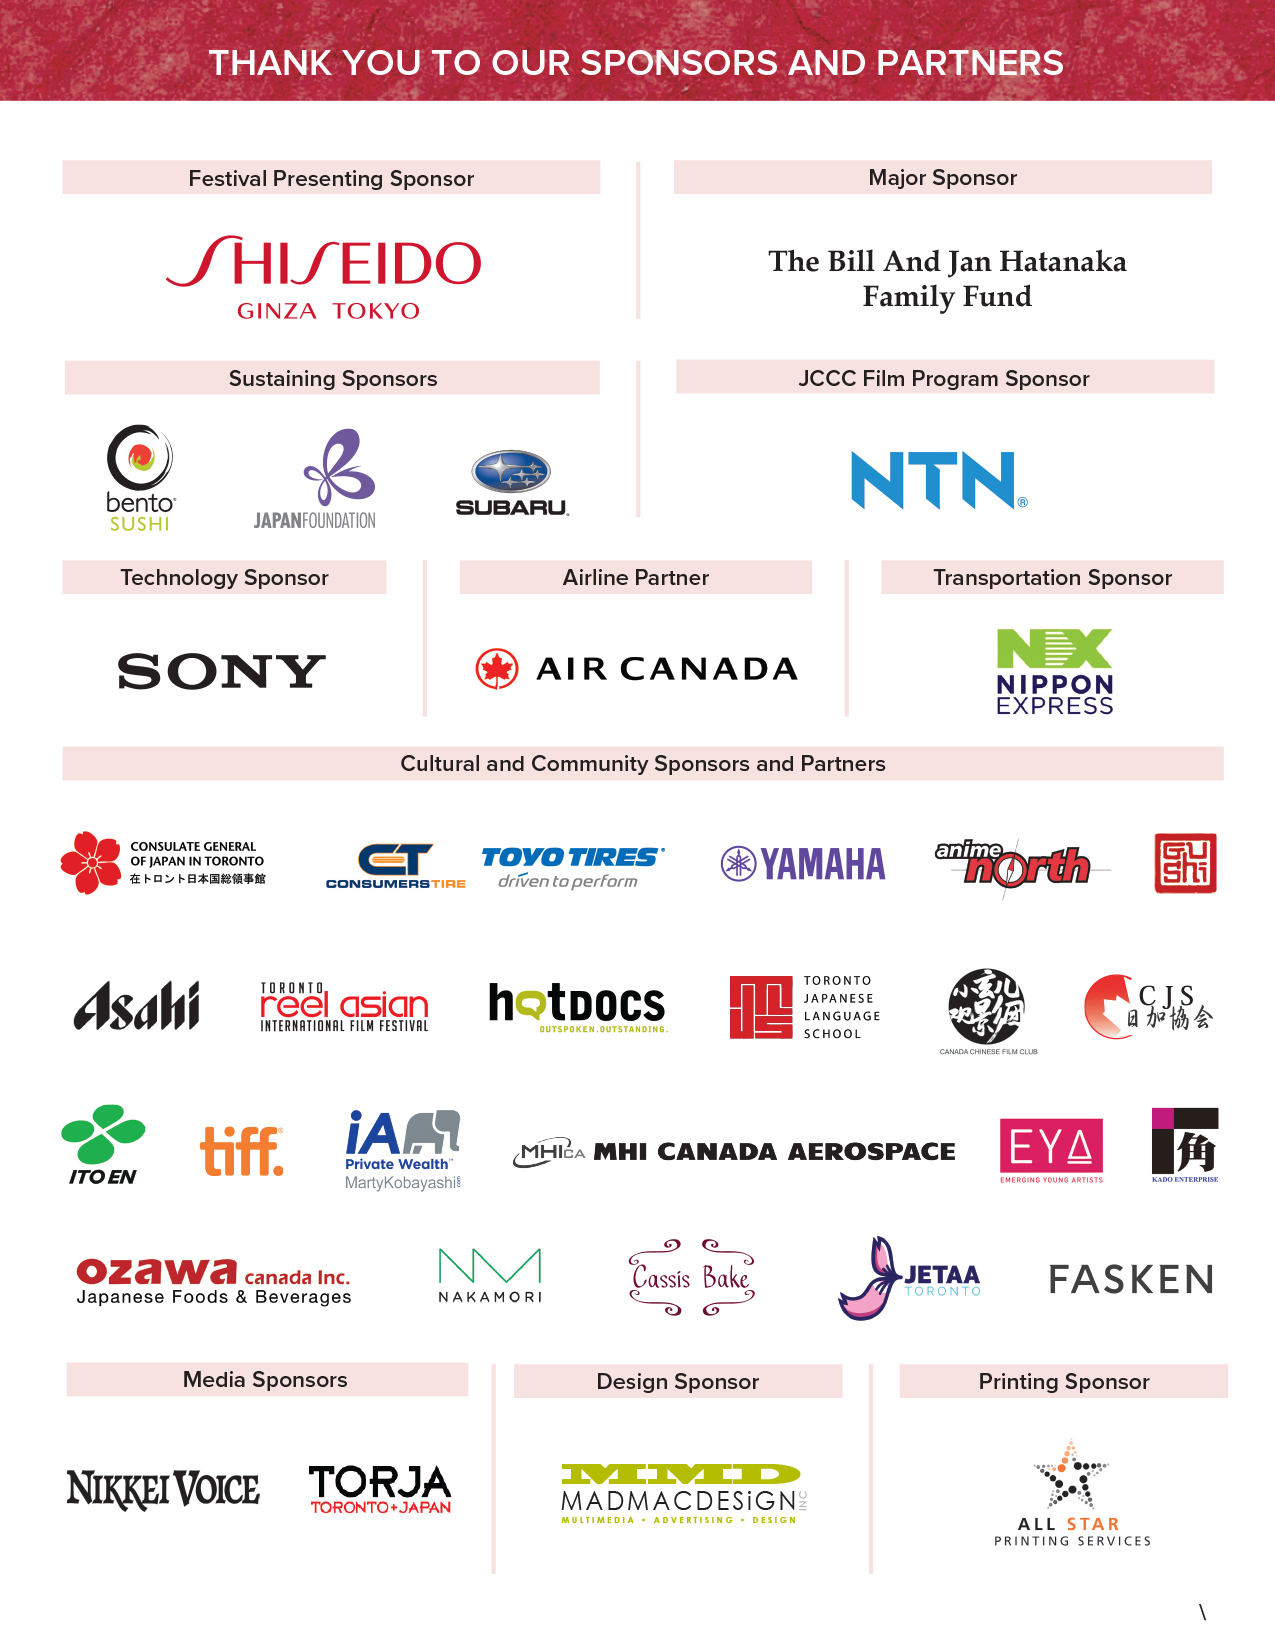 TJFF 2022 Sponsors and Partners